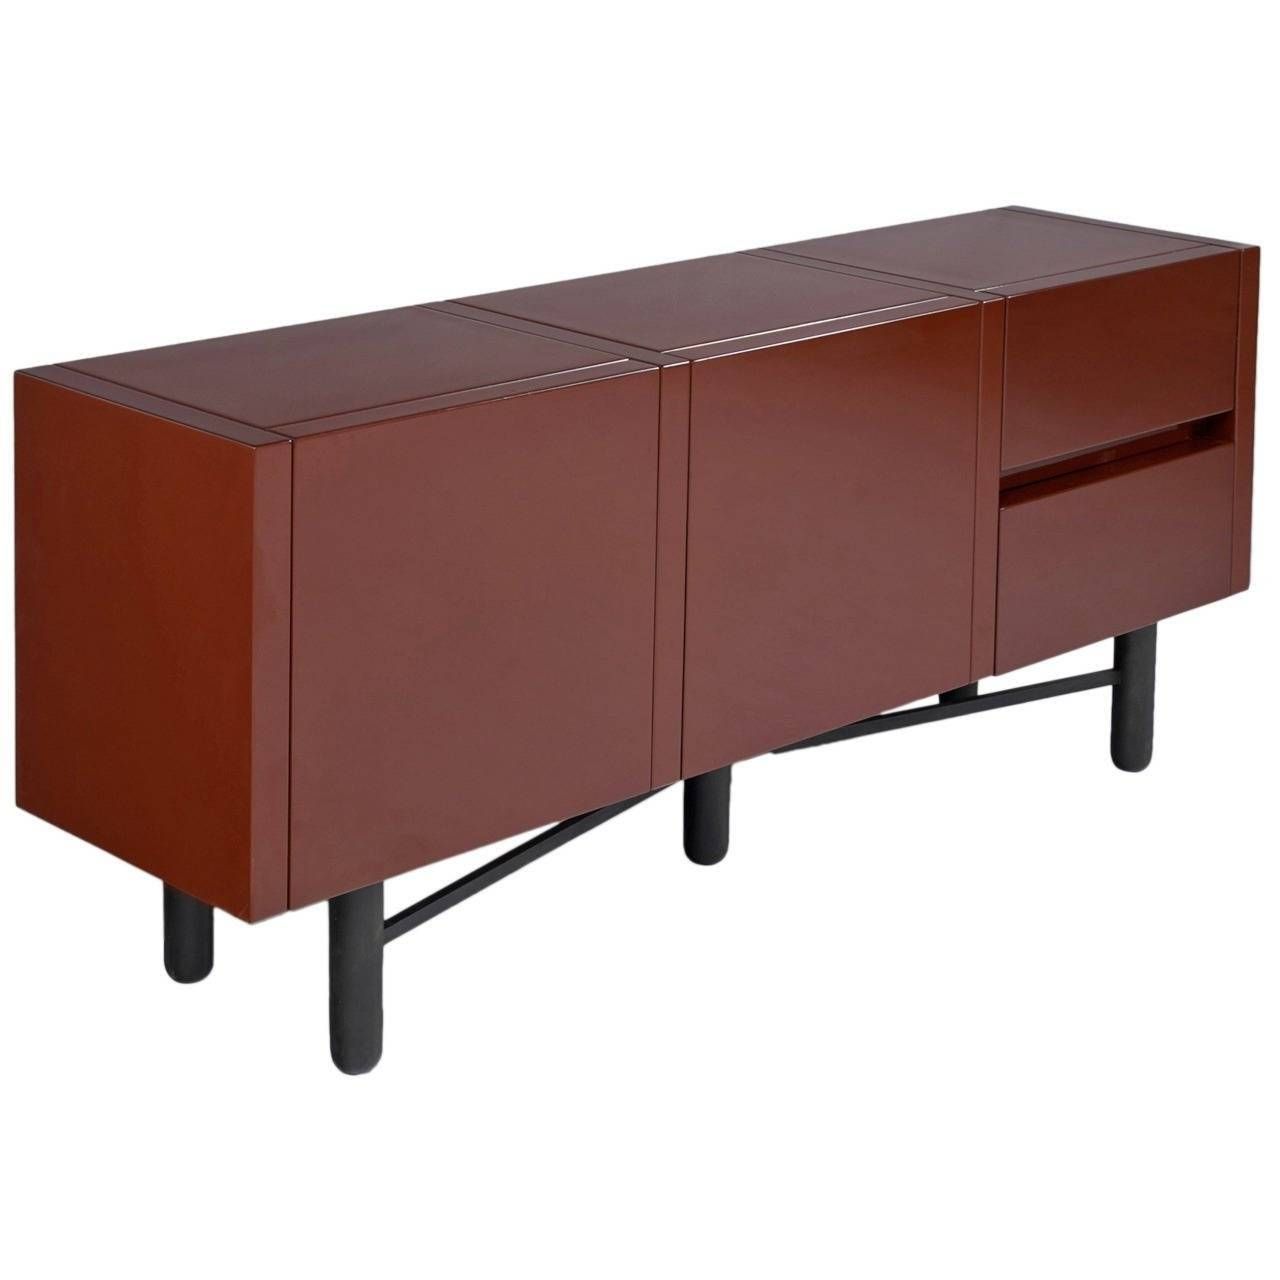 Roche Bobois Red Lacquered High Gloss Sideboard For Sale At 1stdibs Inside White High Gloss Sideboards (View 18 of 30)